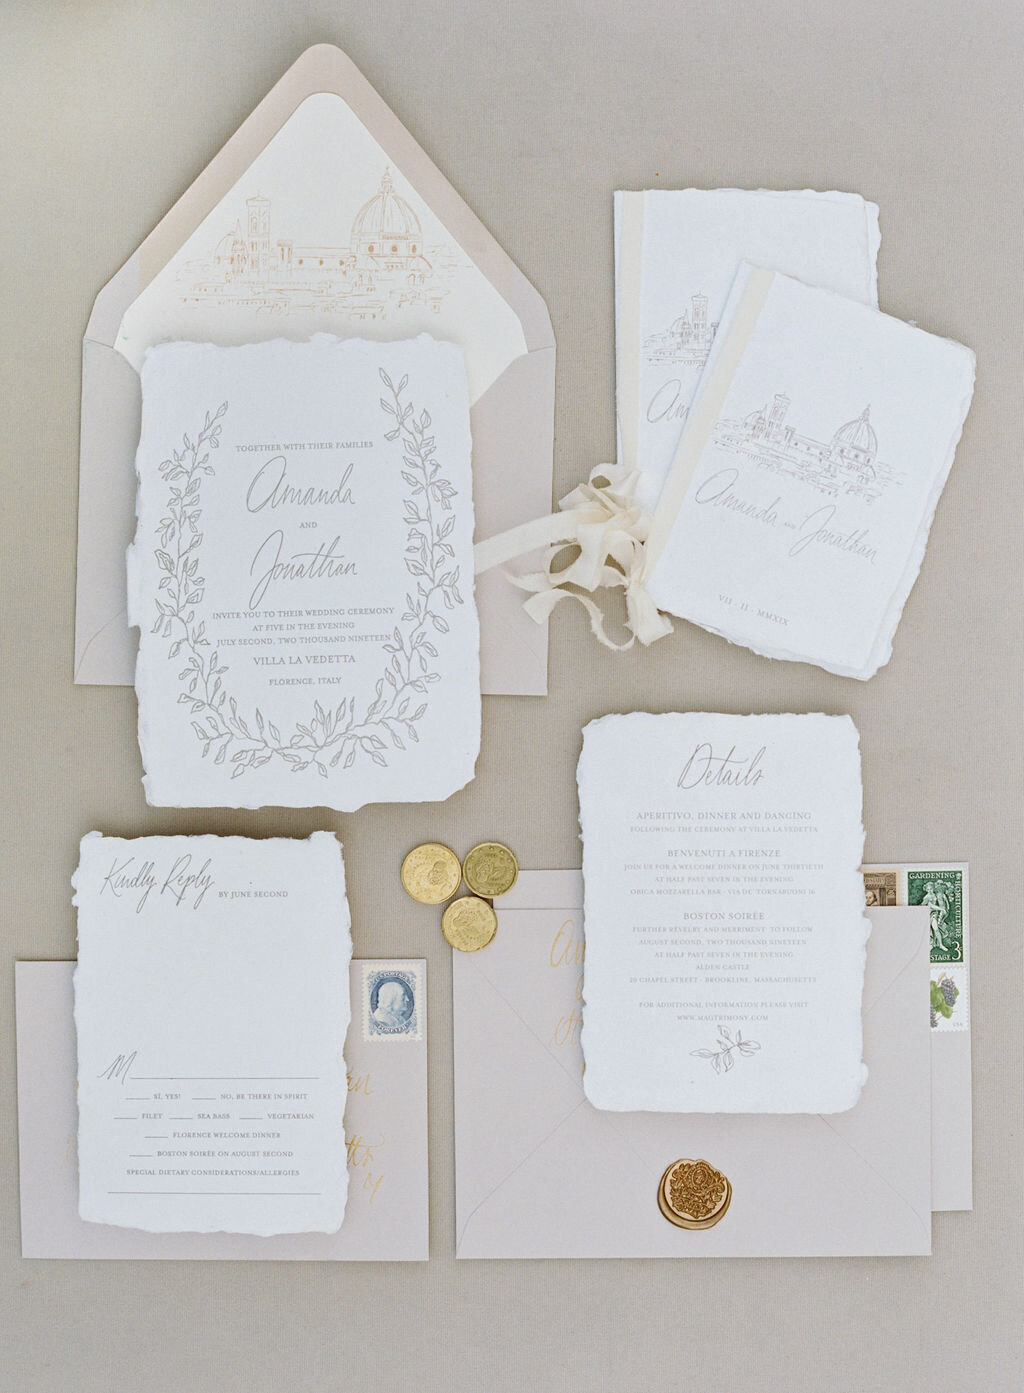 Bespoke wedding stationery for a wedding in Florence